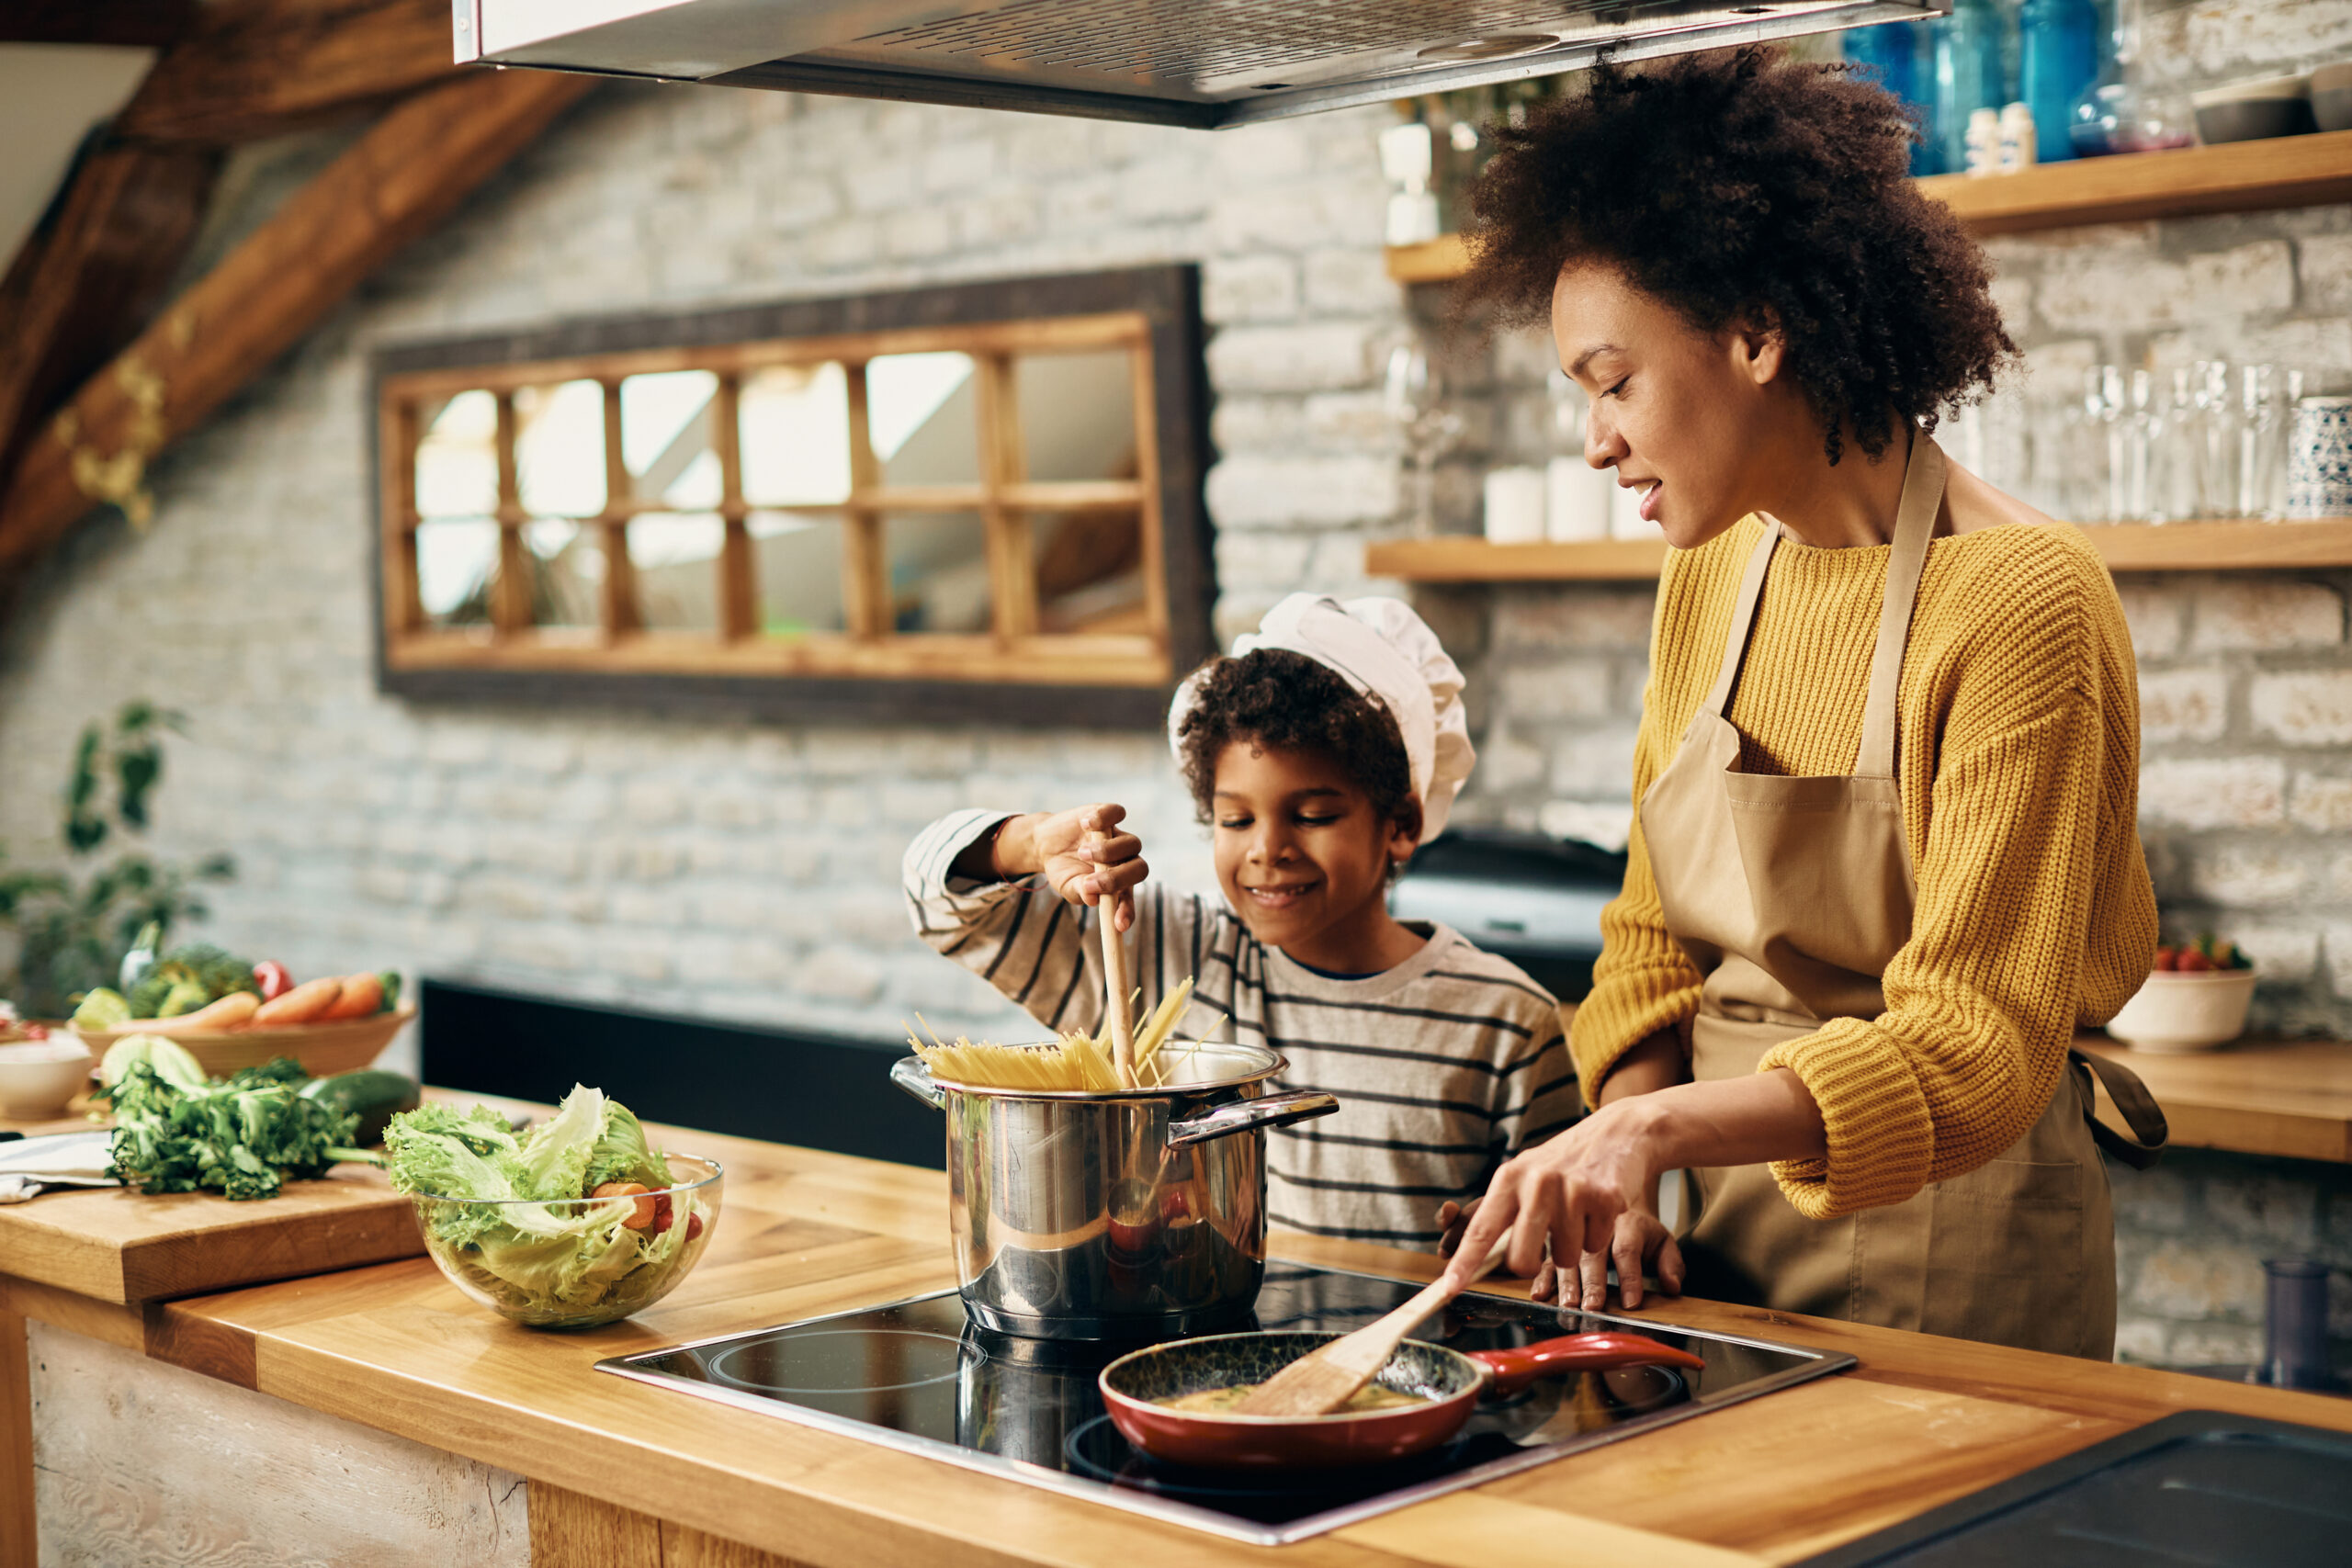 Small black boy preparing food with his mother in the kitchen.